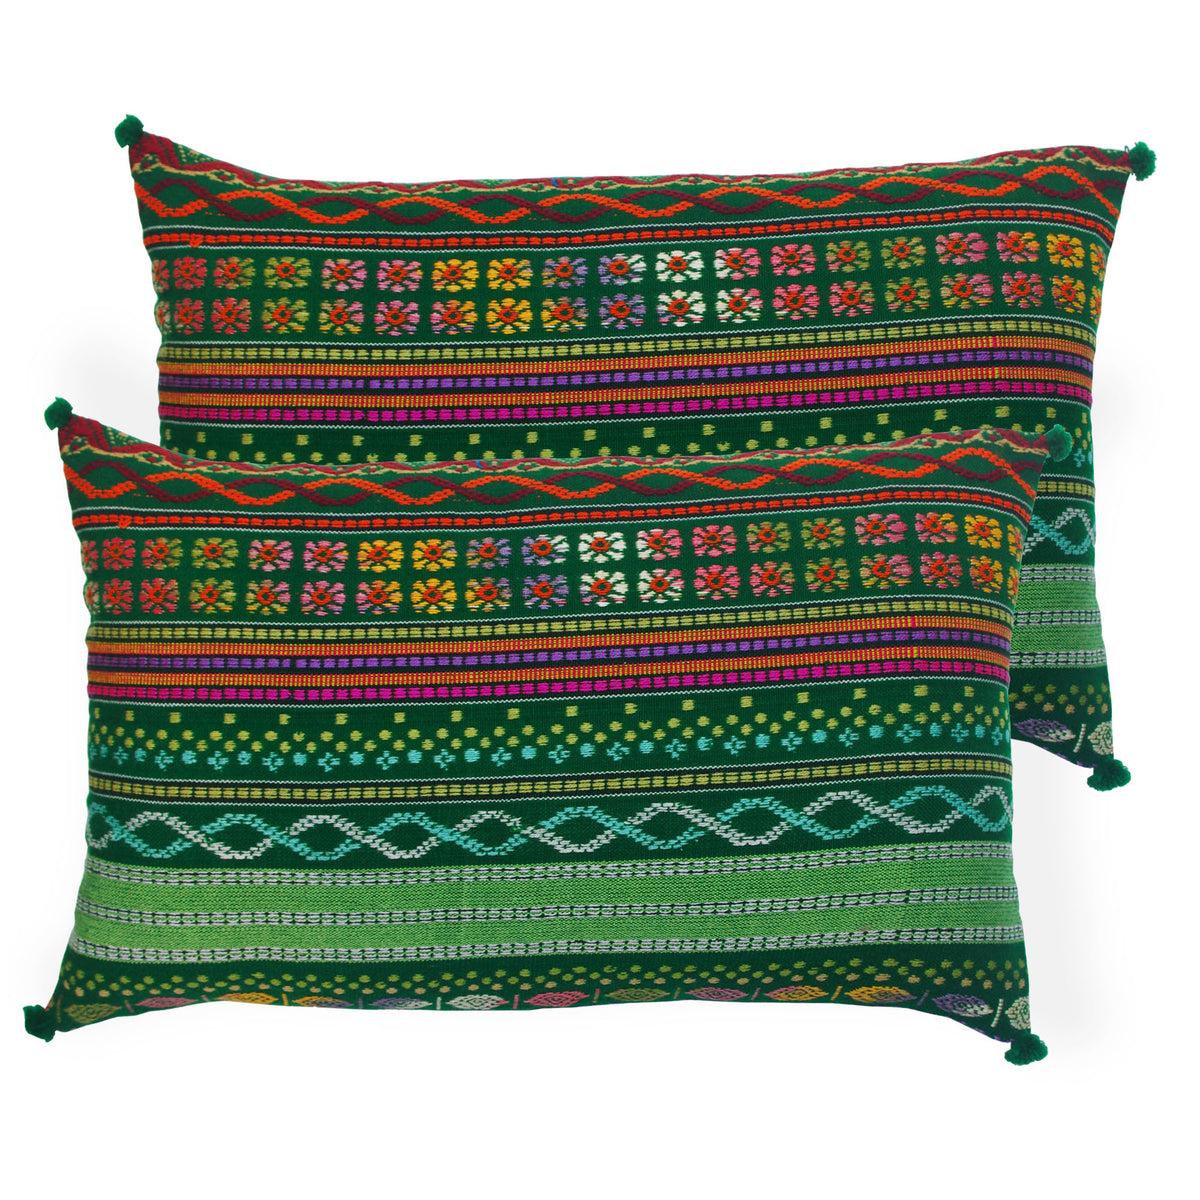 Pack of 2 Oblong Handloom Cotton Pillow Covers - Green